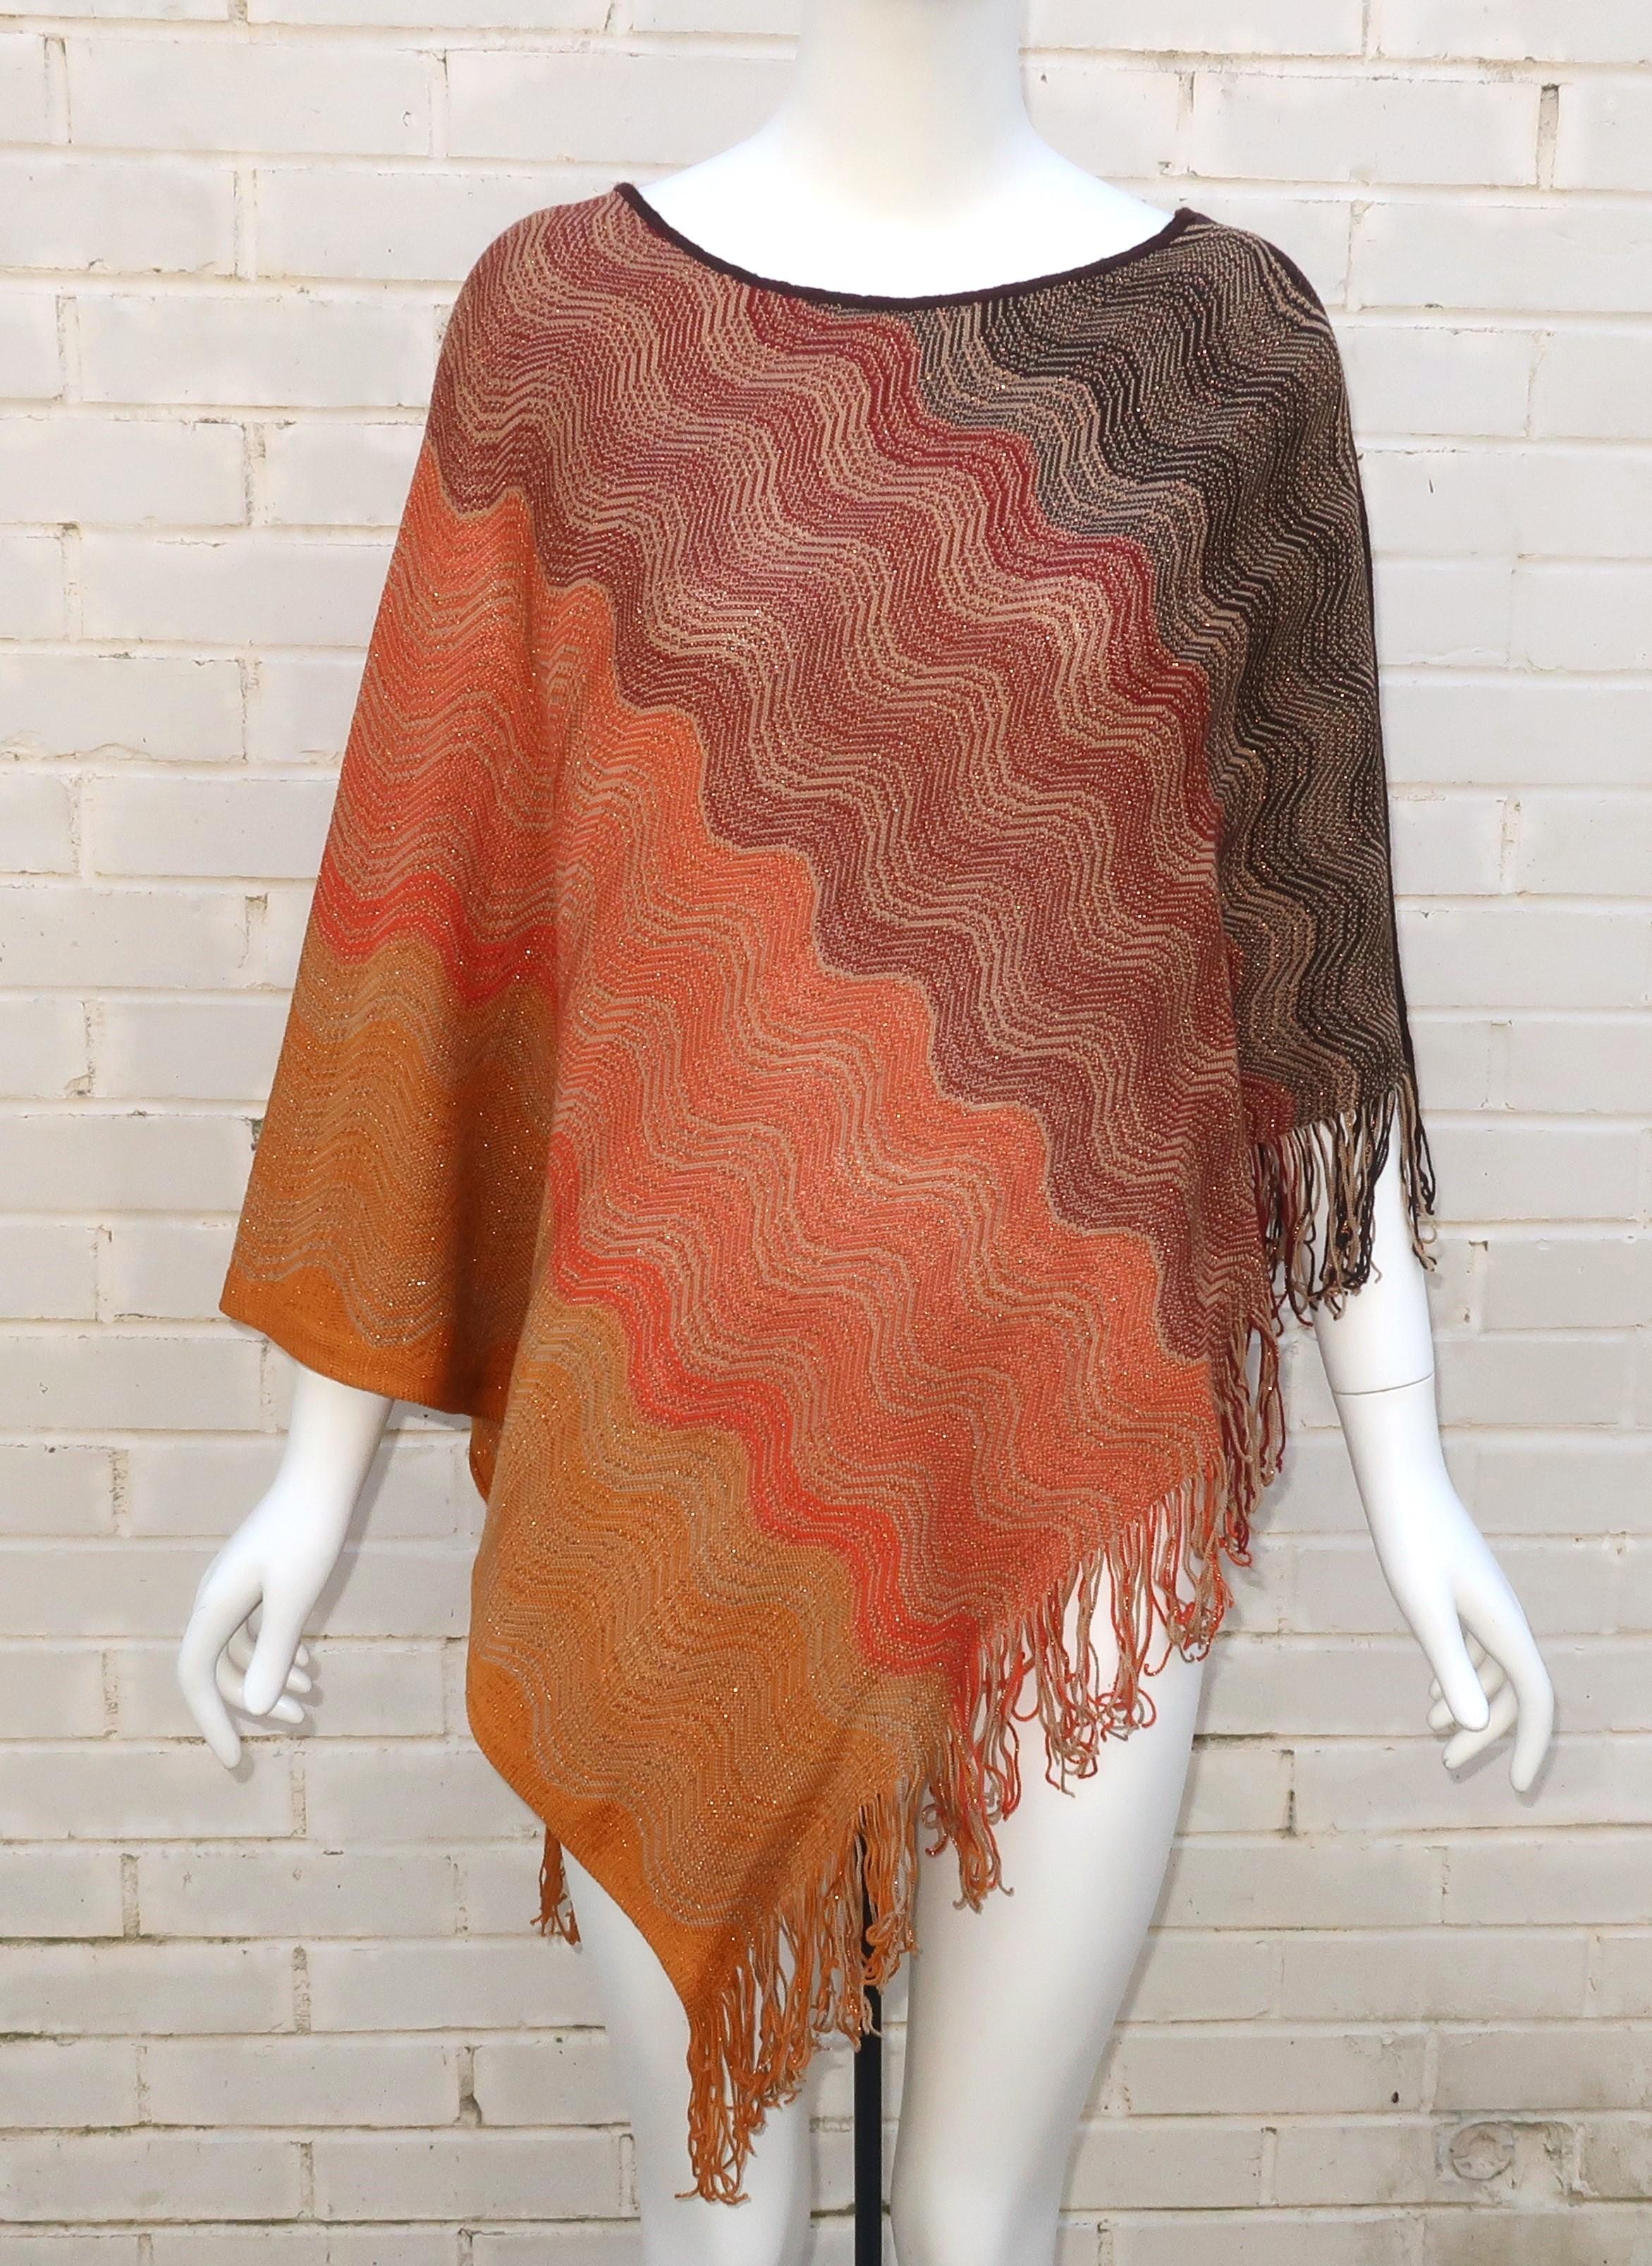 Missoni incorporates their iconic zigzag stripe pattern into a wonderful fringed wool poncho in earth tone browns with autumnal amber shades and flecks of metallic copper threading.  The casual pullover style is lightweight and can beautifully drape